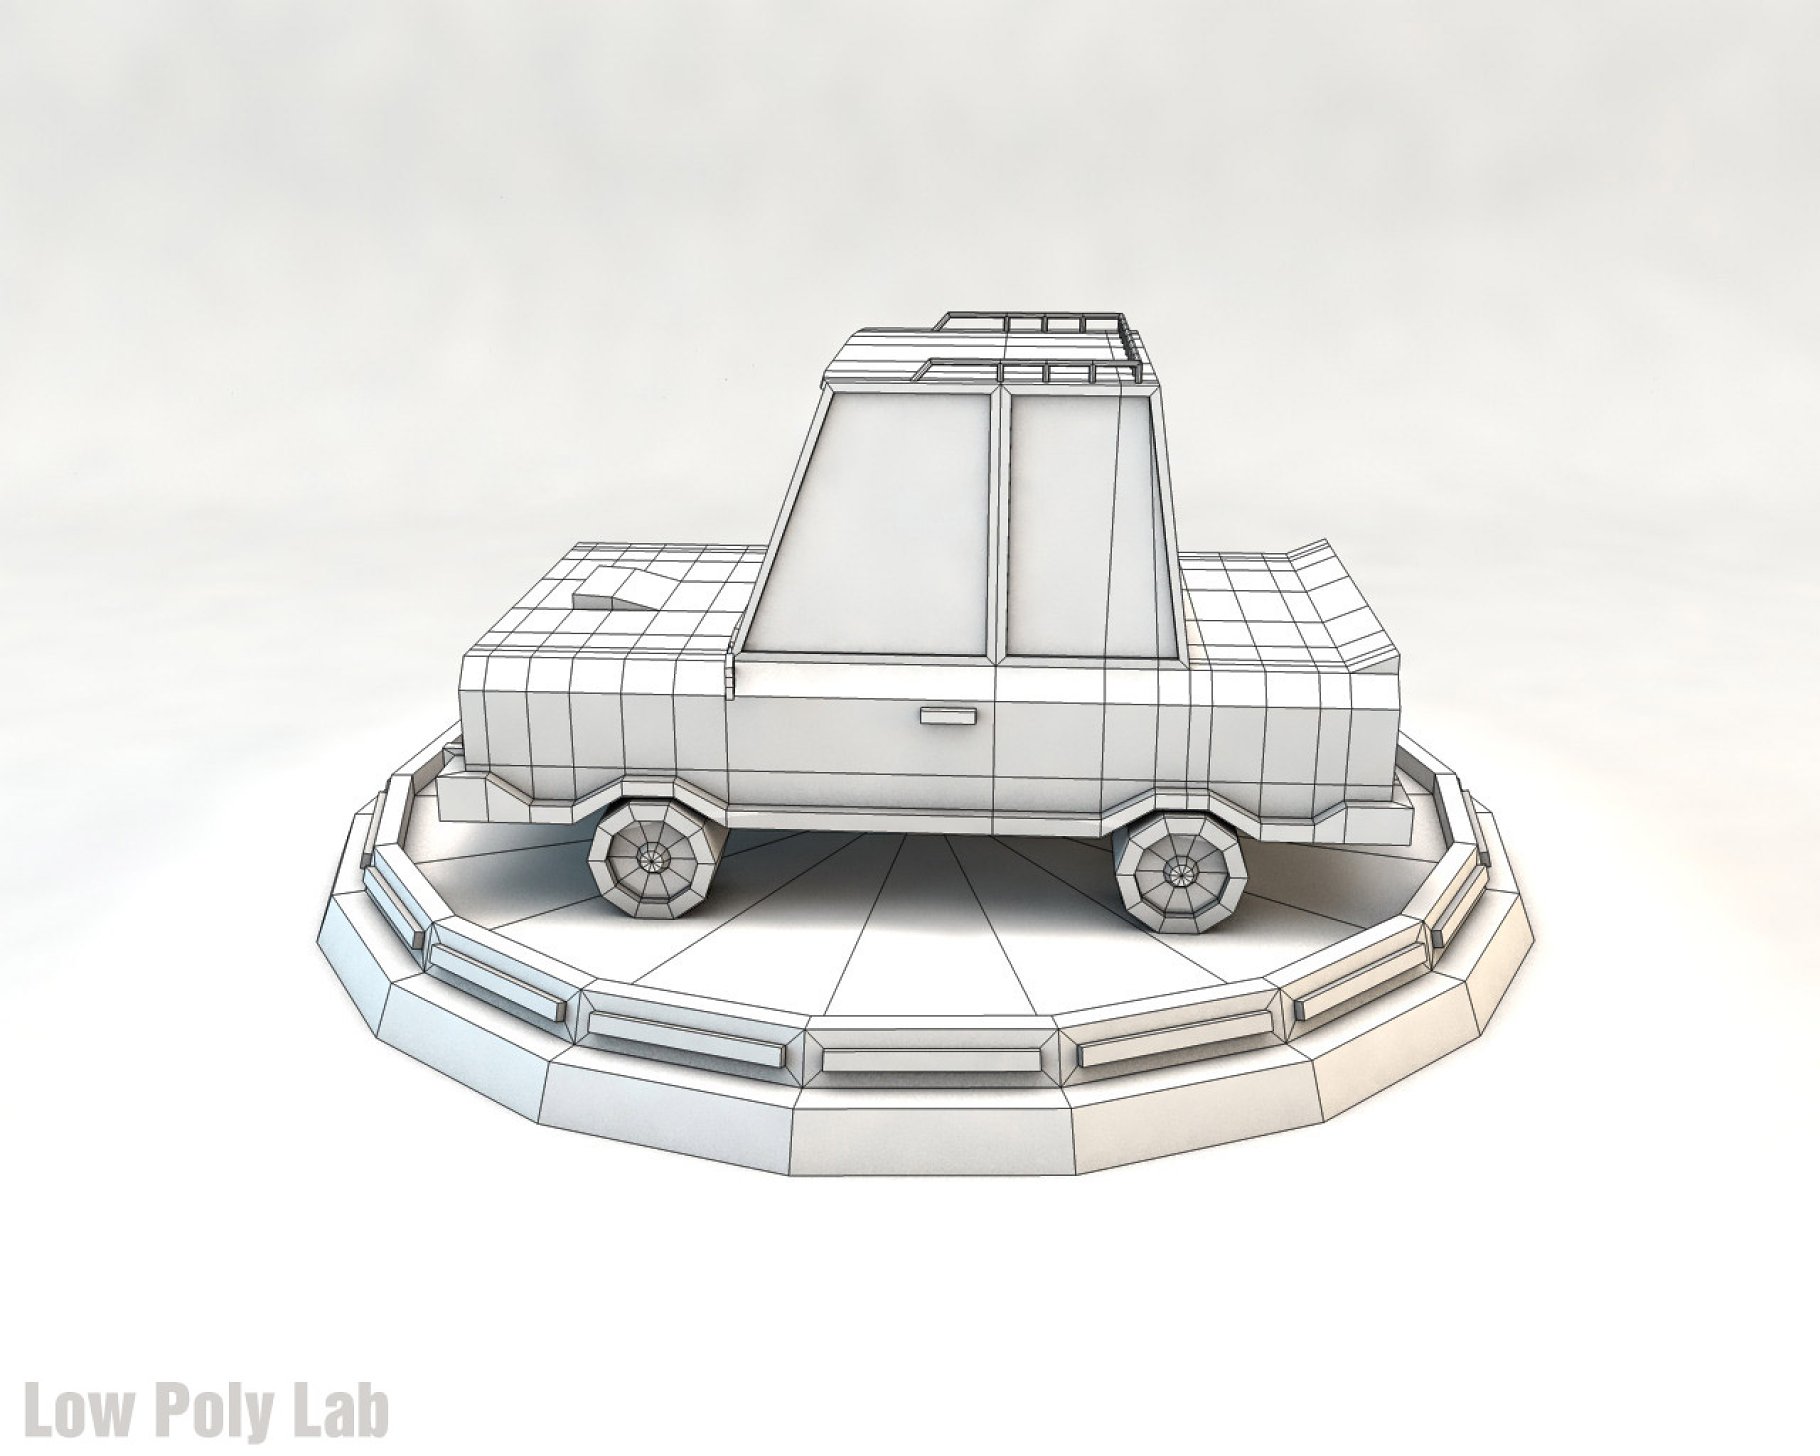 Gray low poly car graphic mockup in blue on the left side on a gray background.